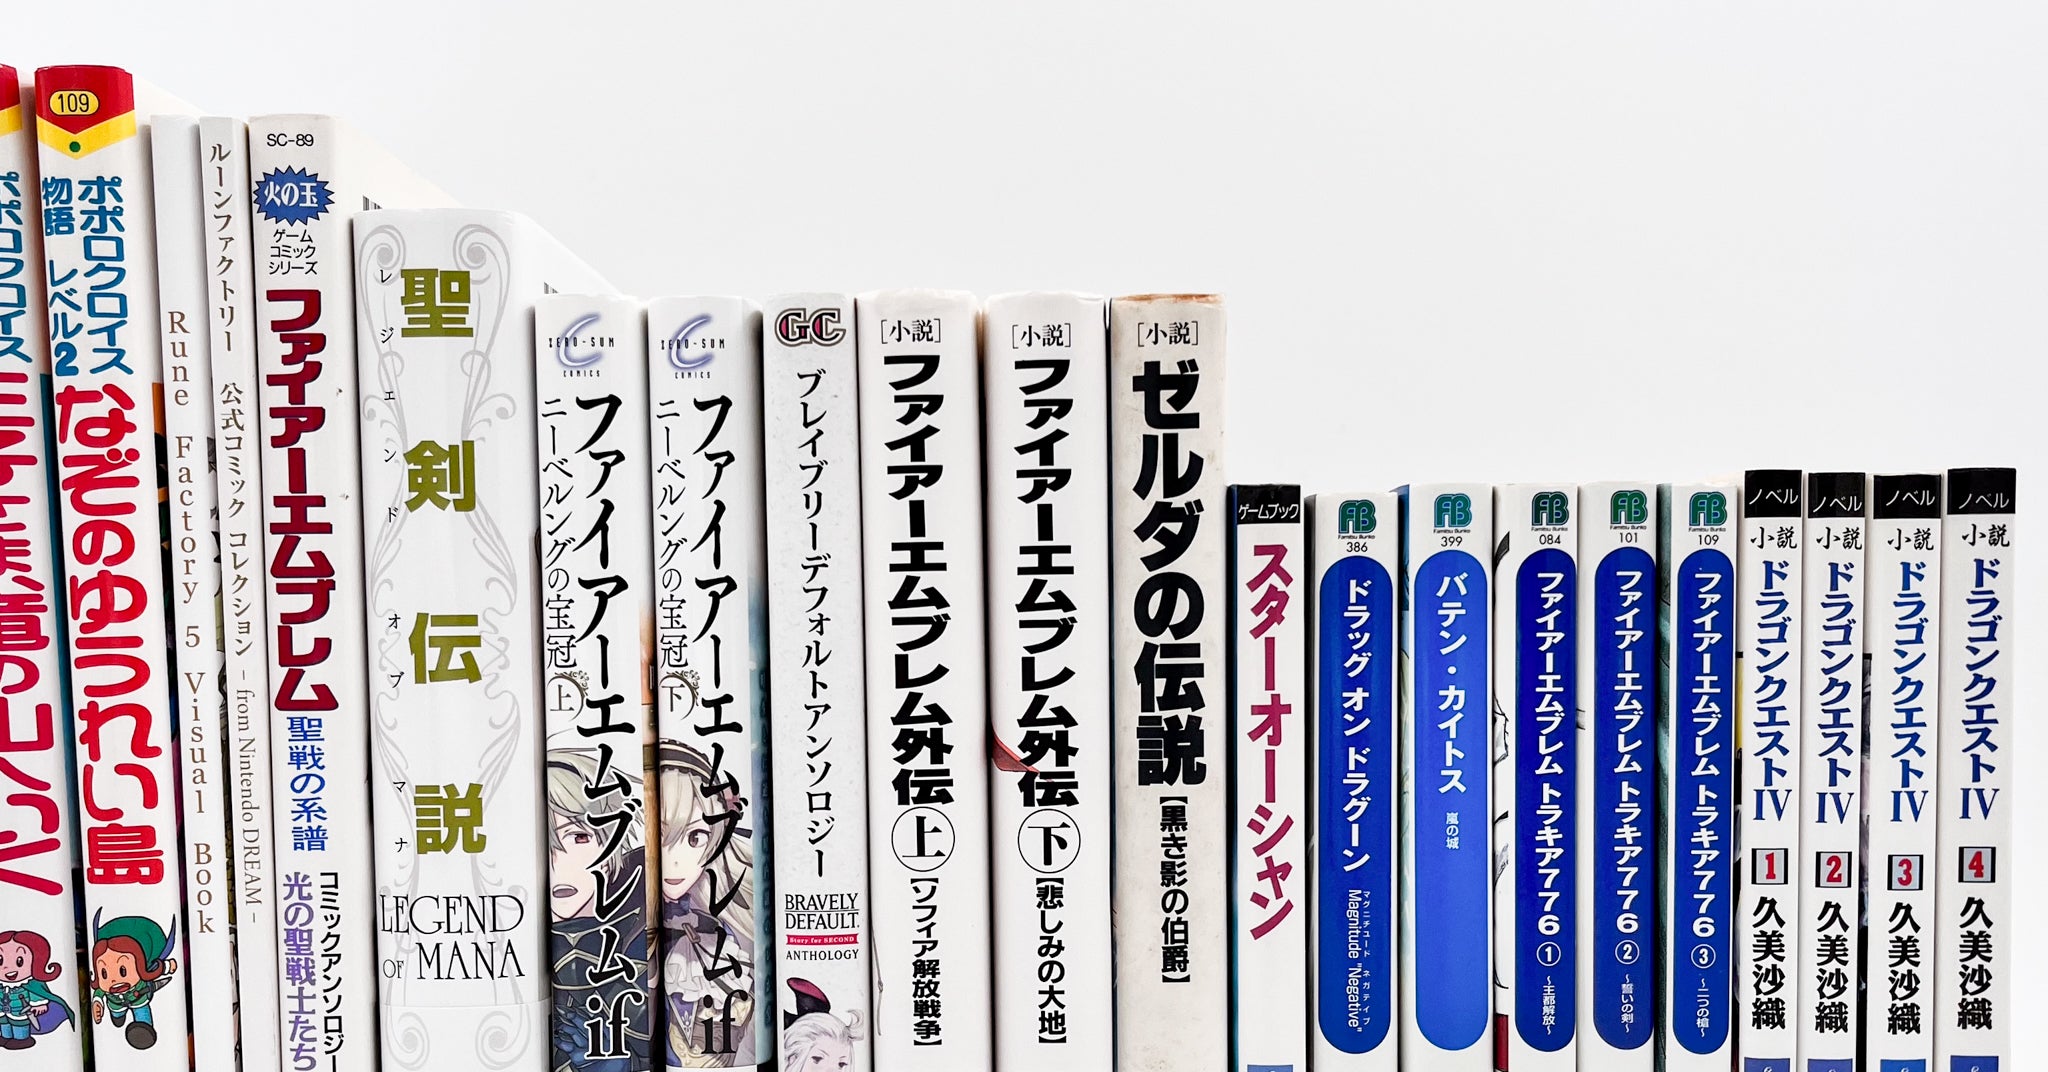 How Nonoya Books Assesses the Condition of Manga and Collectibles